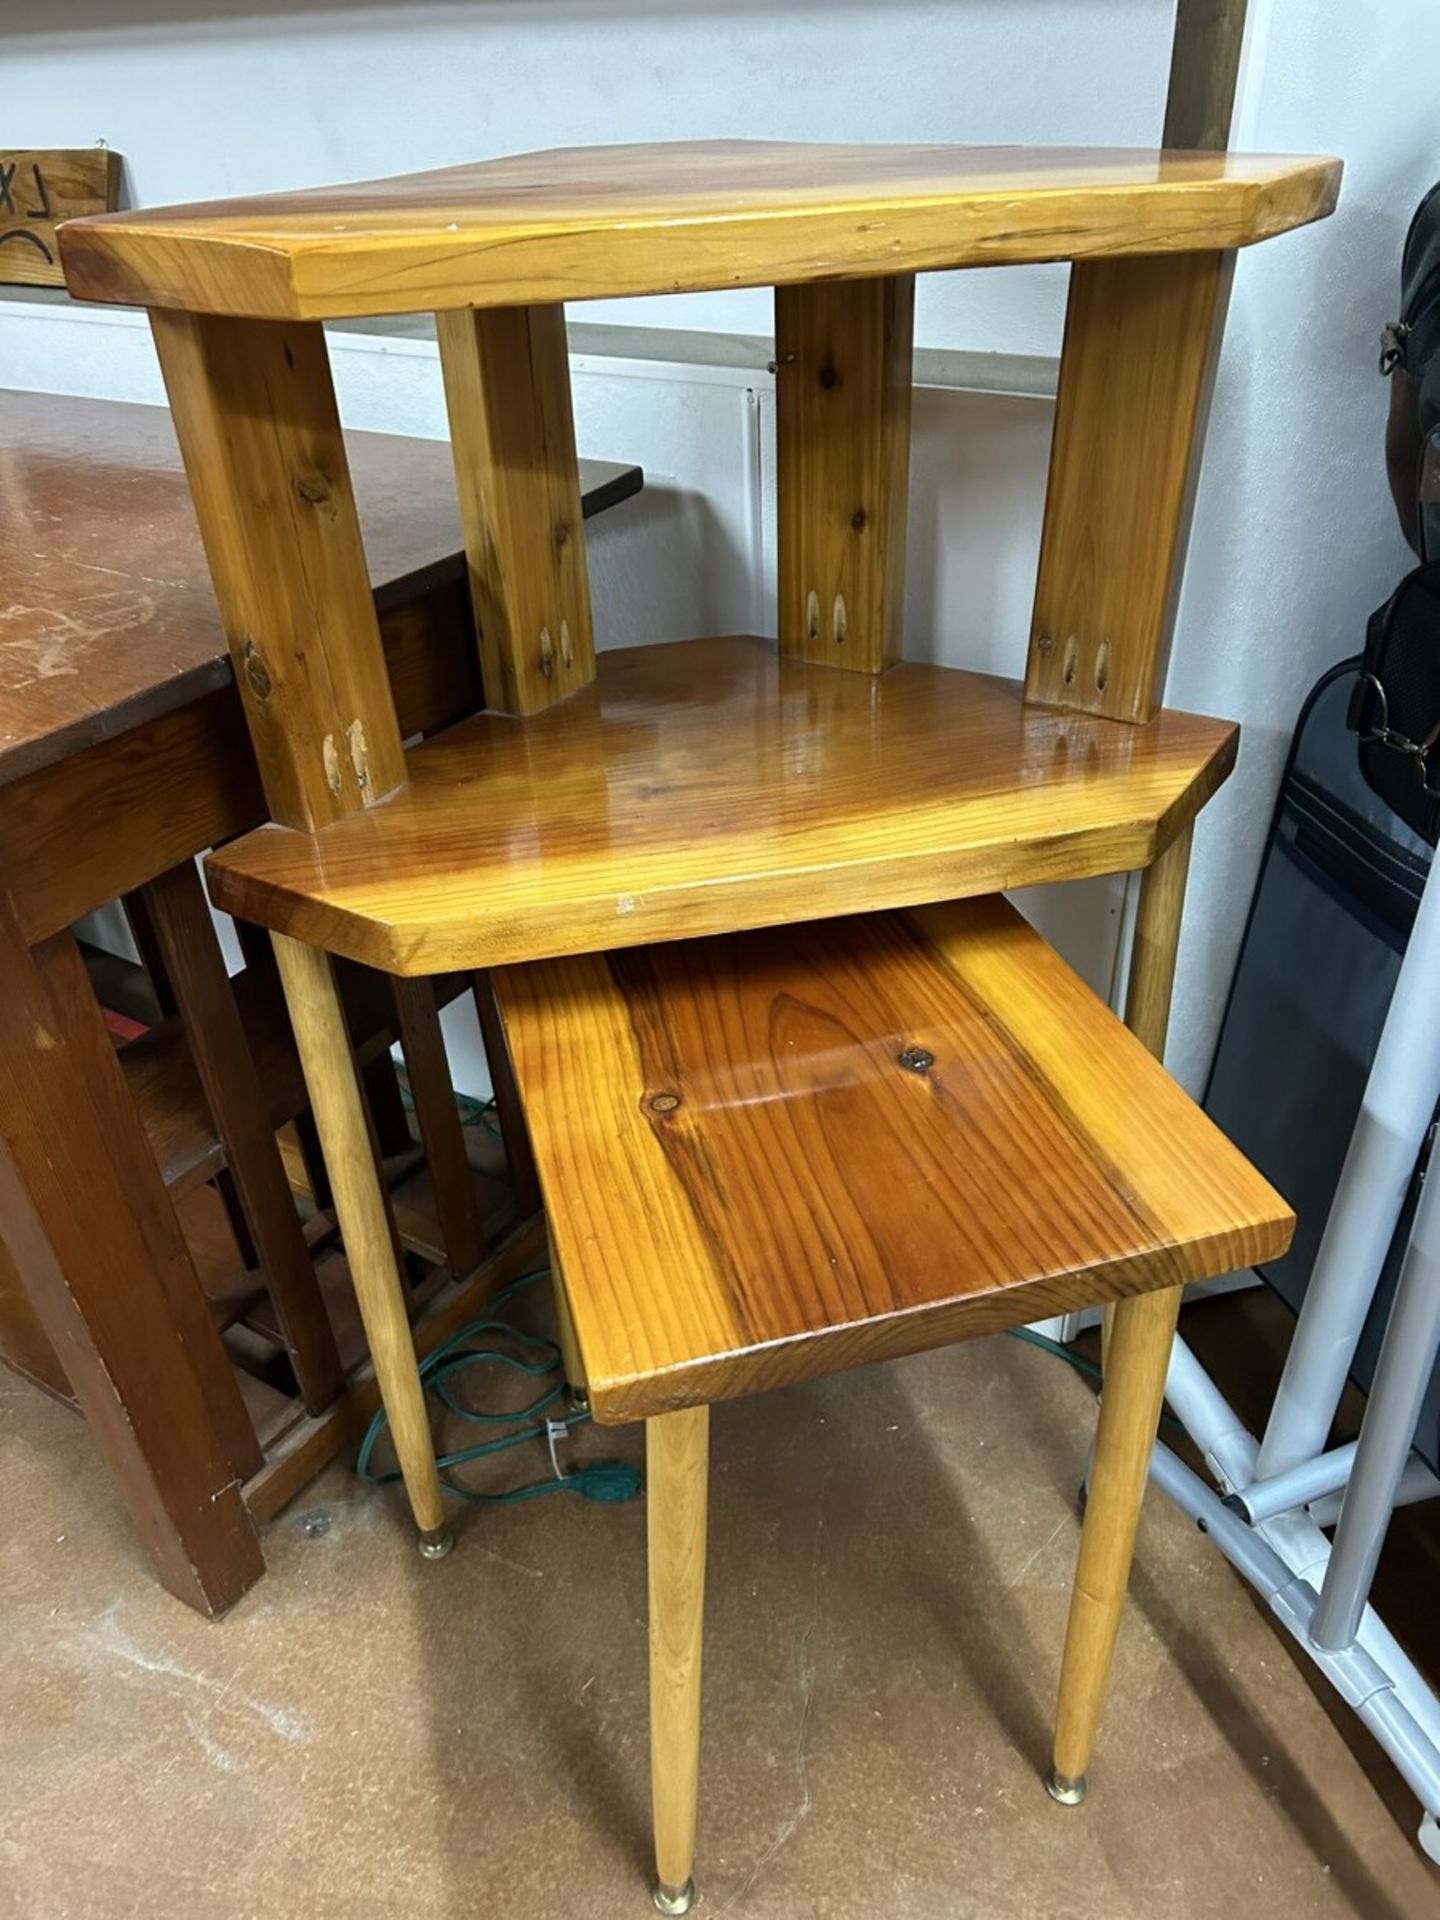 WOOD TABLE W/CORNER STANDS 27X48X30.5 - Image 3 of 4